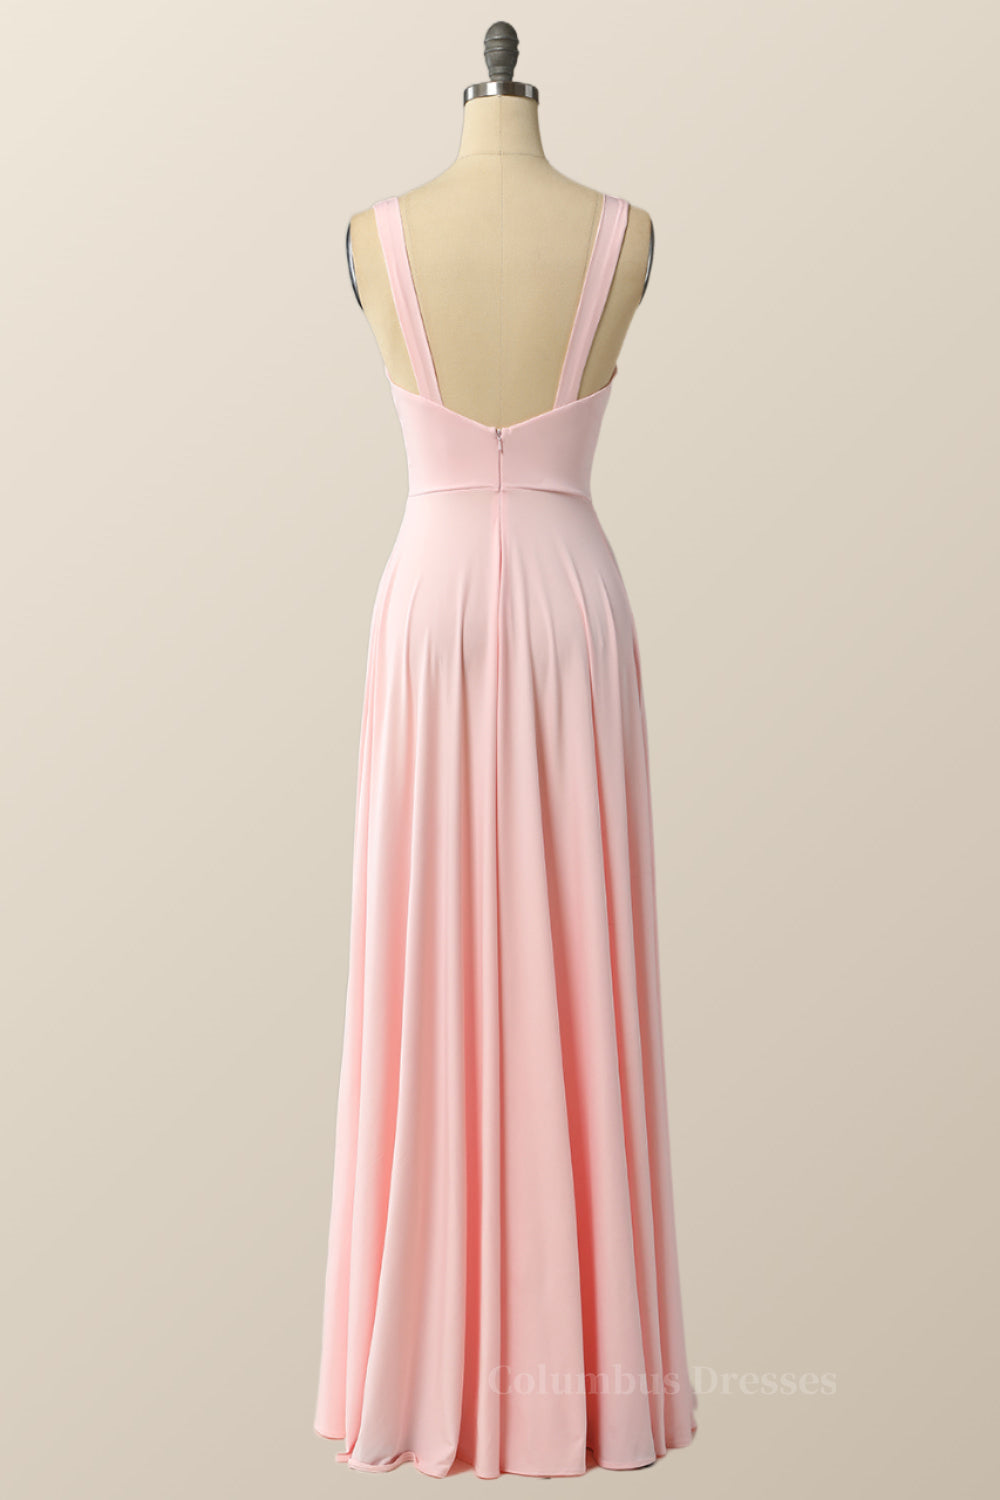 Prom Dress Ball Gown, Simply Pink Empire A-line Maxi Dress with Slit